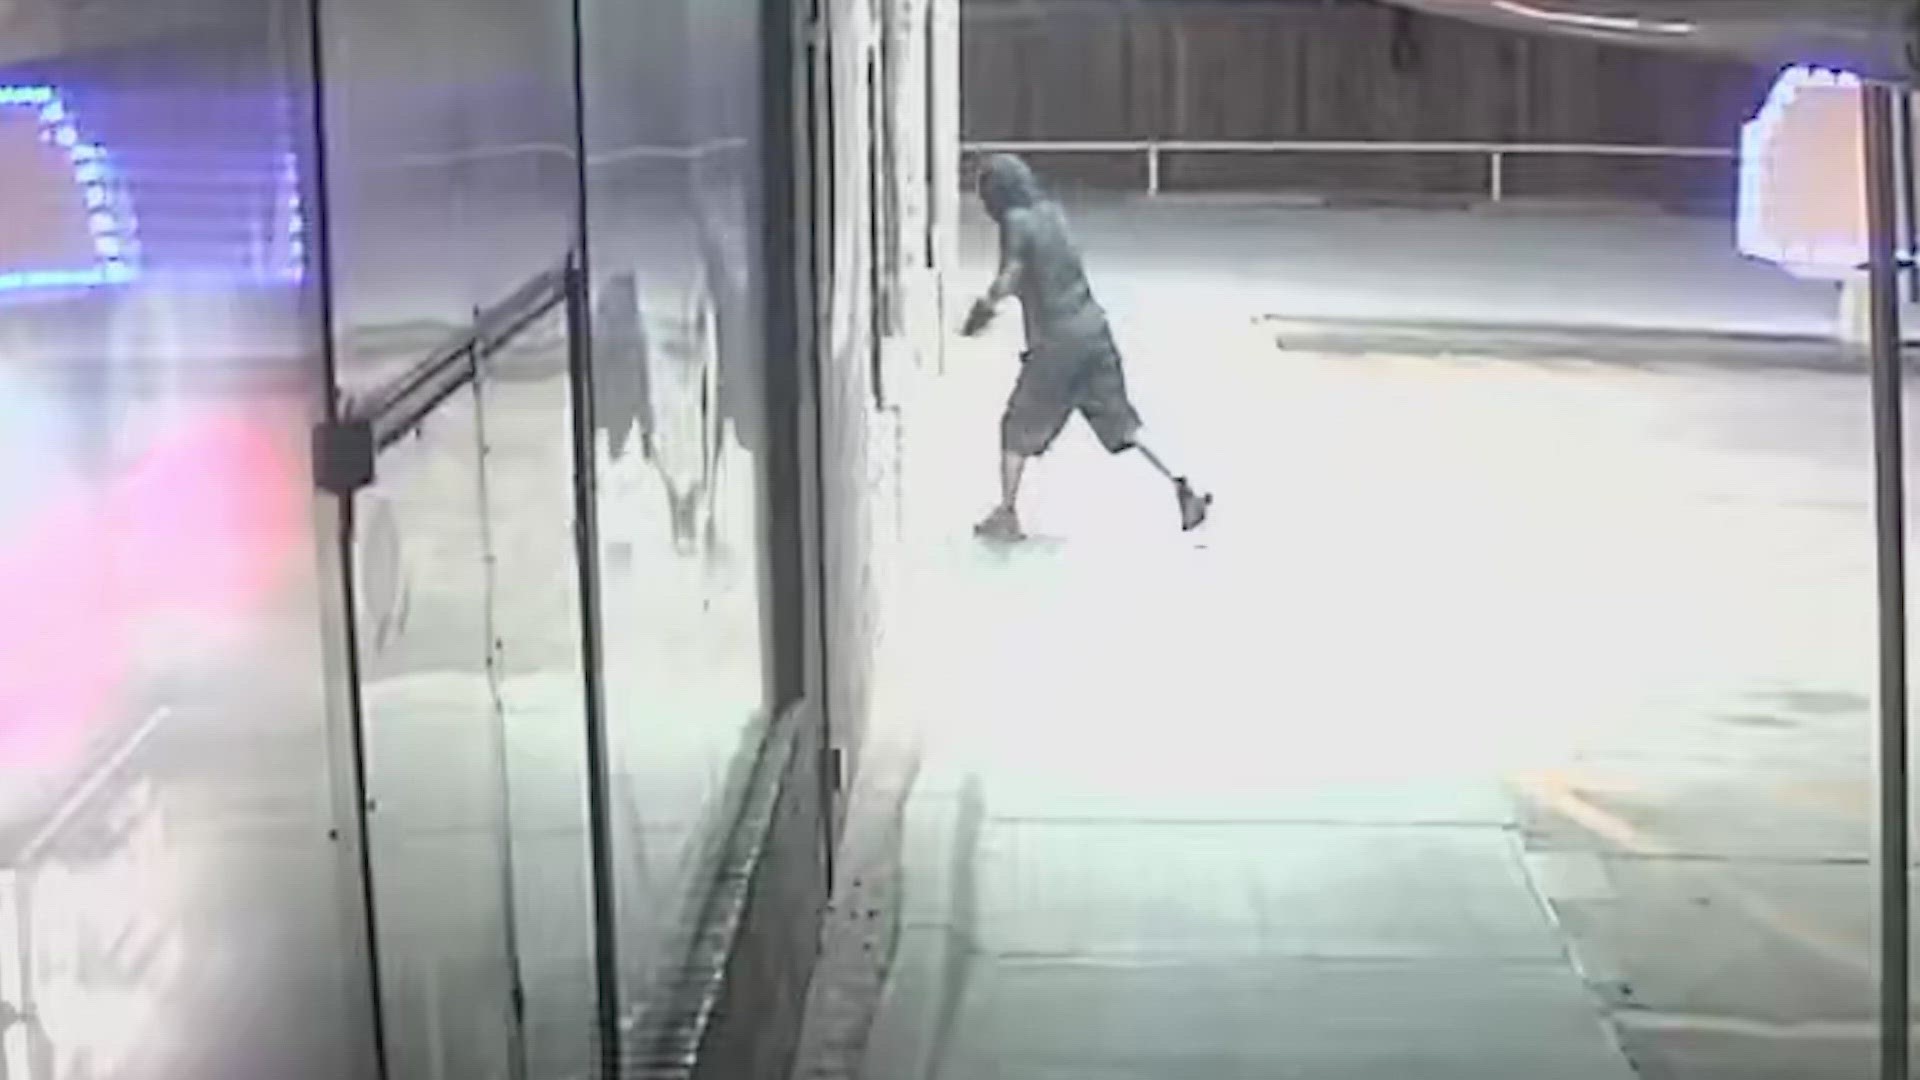 Surveillance footage shows a masked person walk to the restaurant and shatter several glass windows.